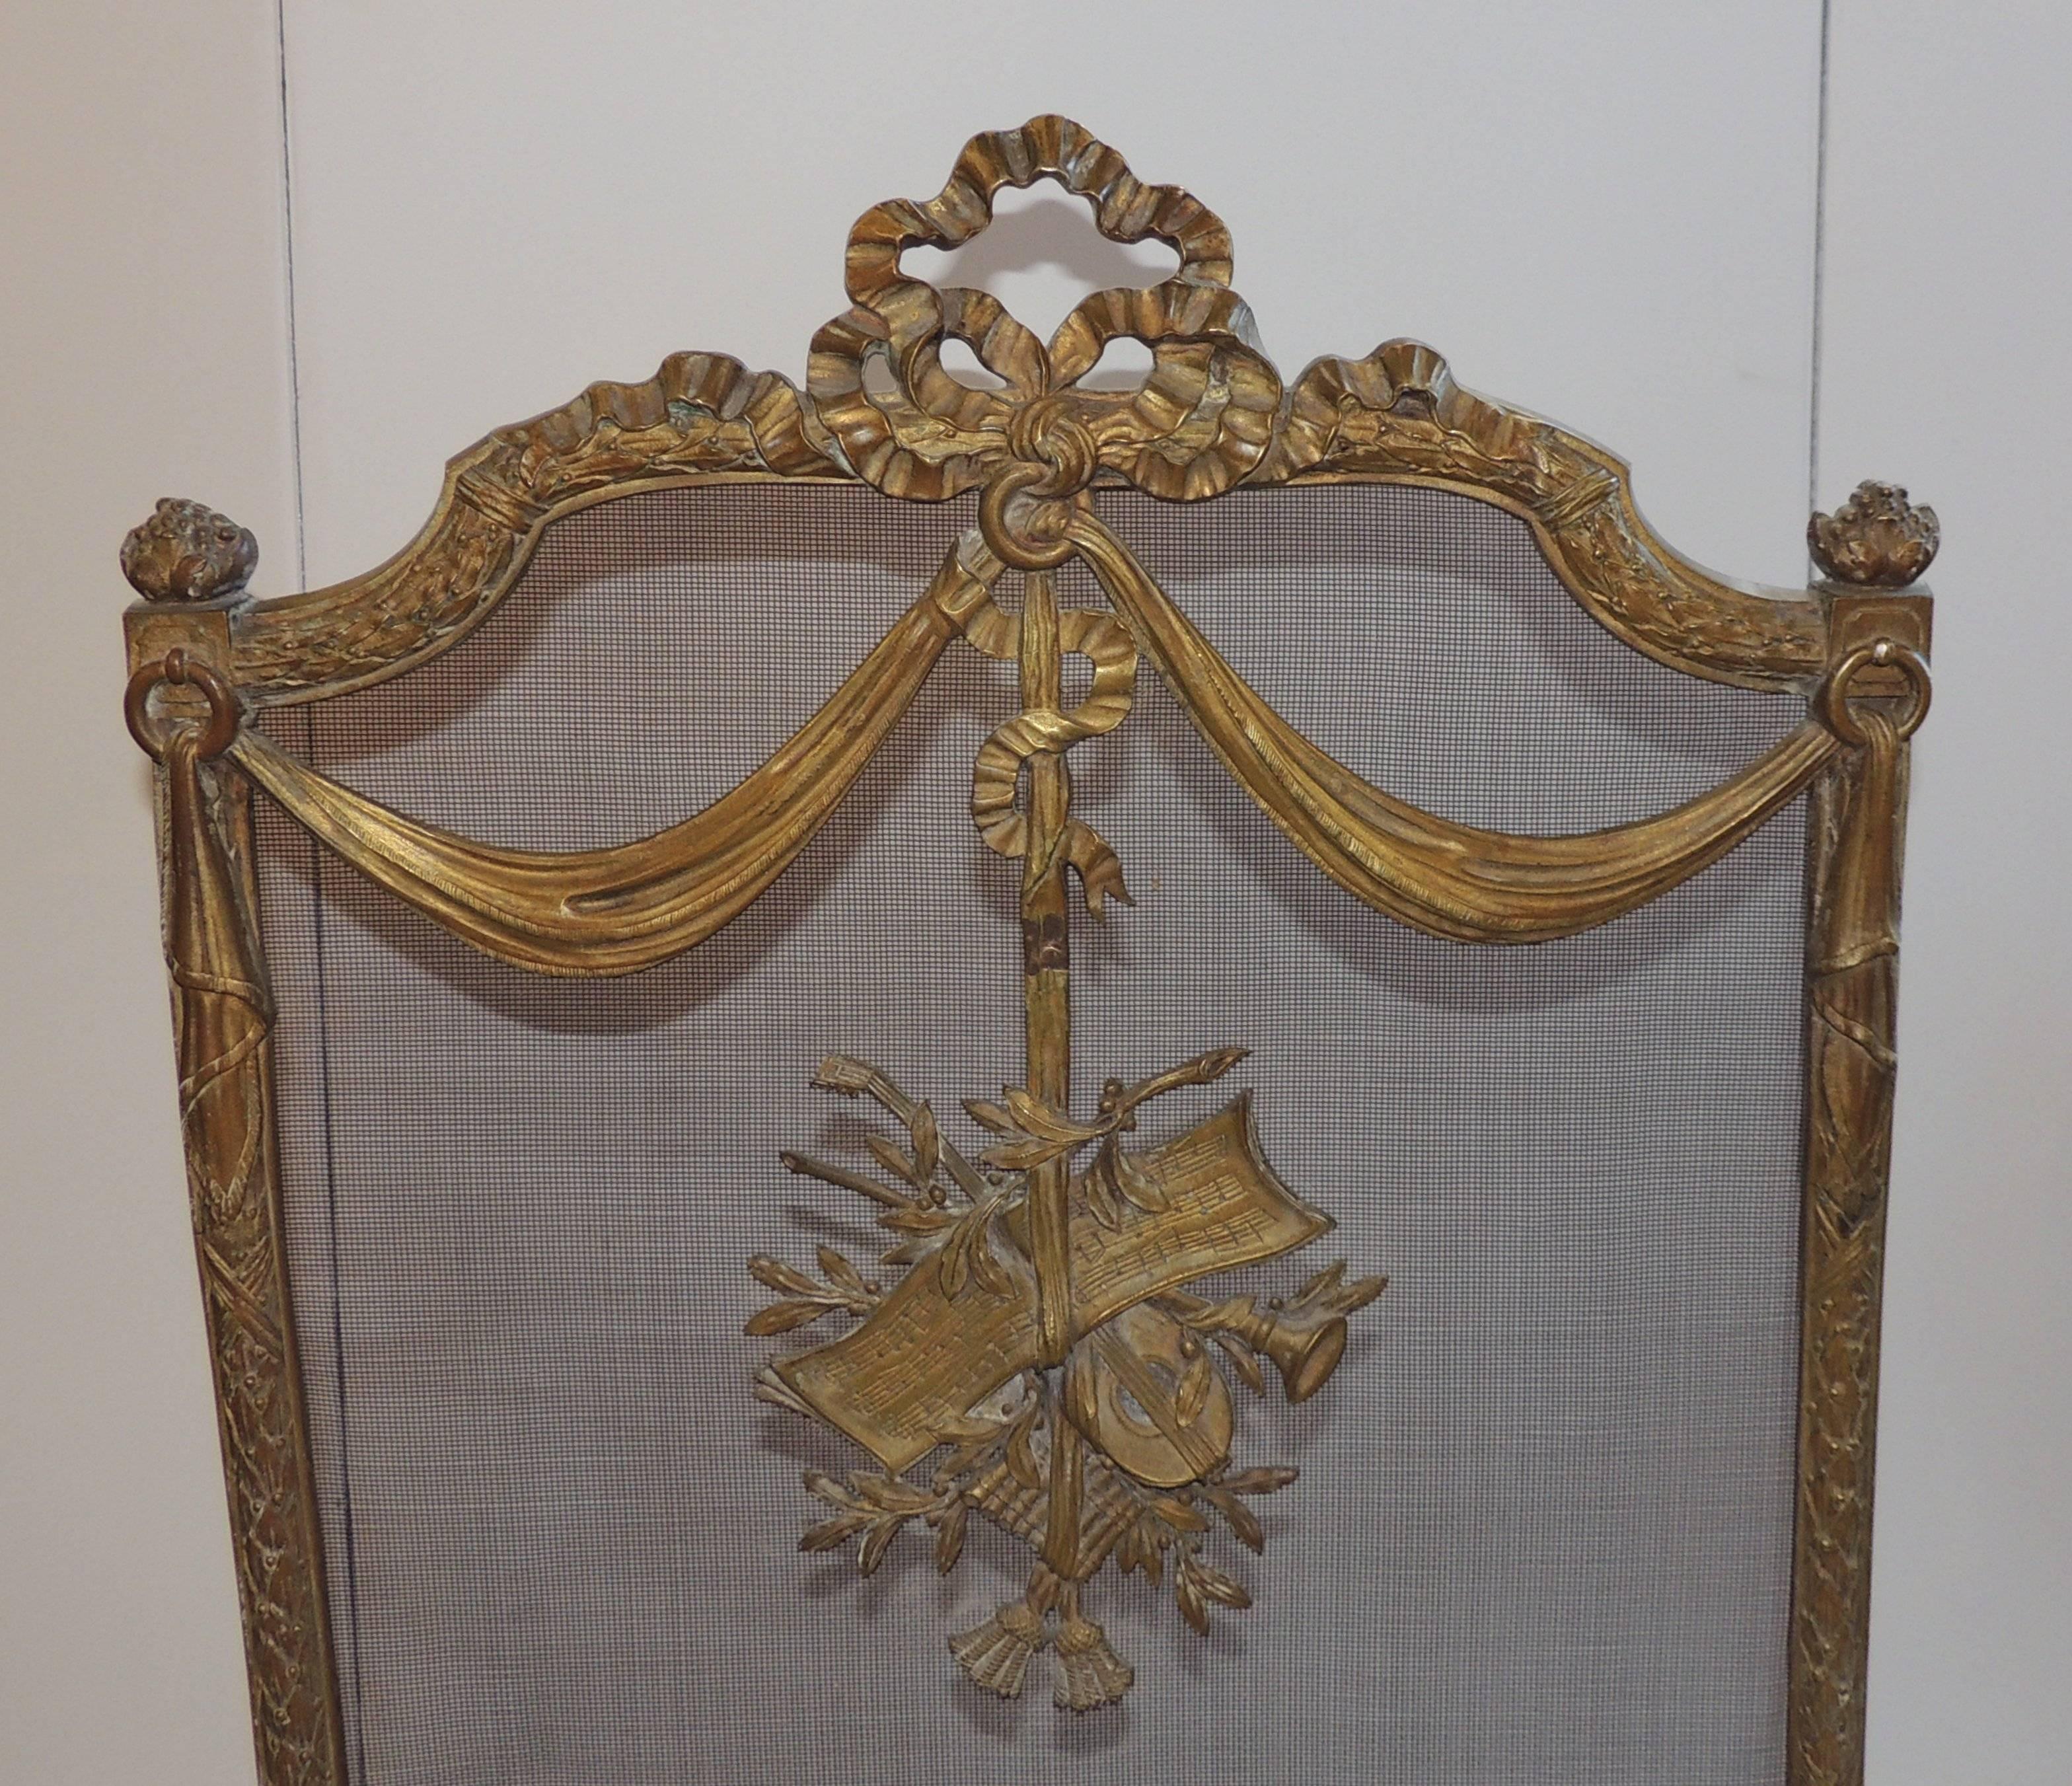 Wonderful French Bronze Bow Ribbons Floral Musical Fireplace Screen Fire Screen 1